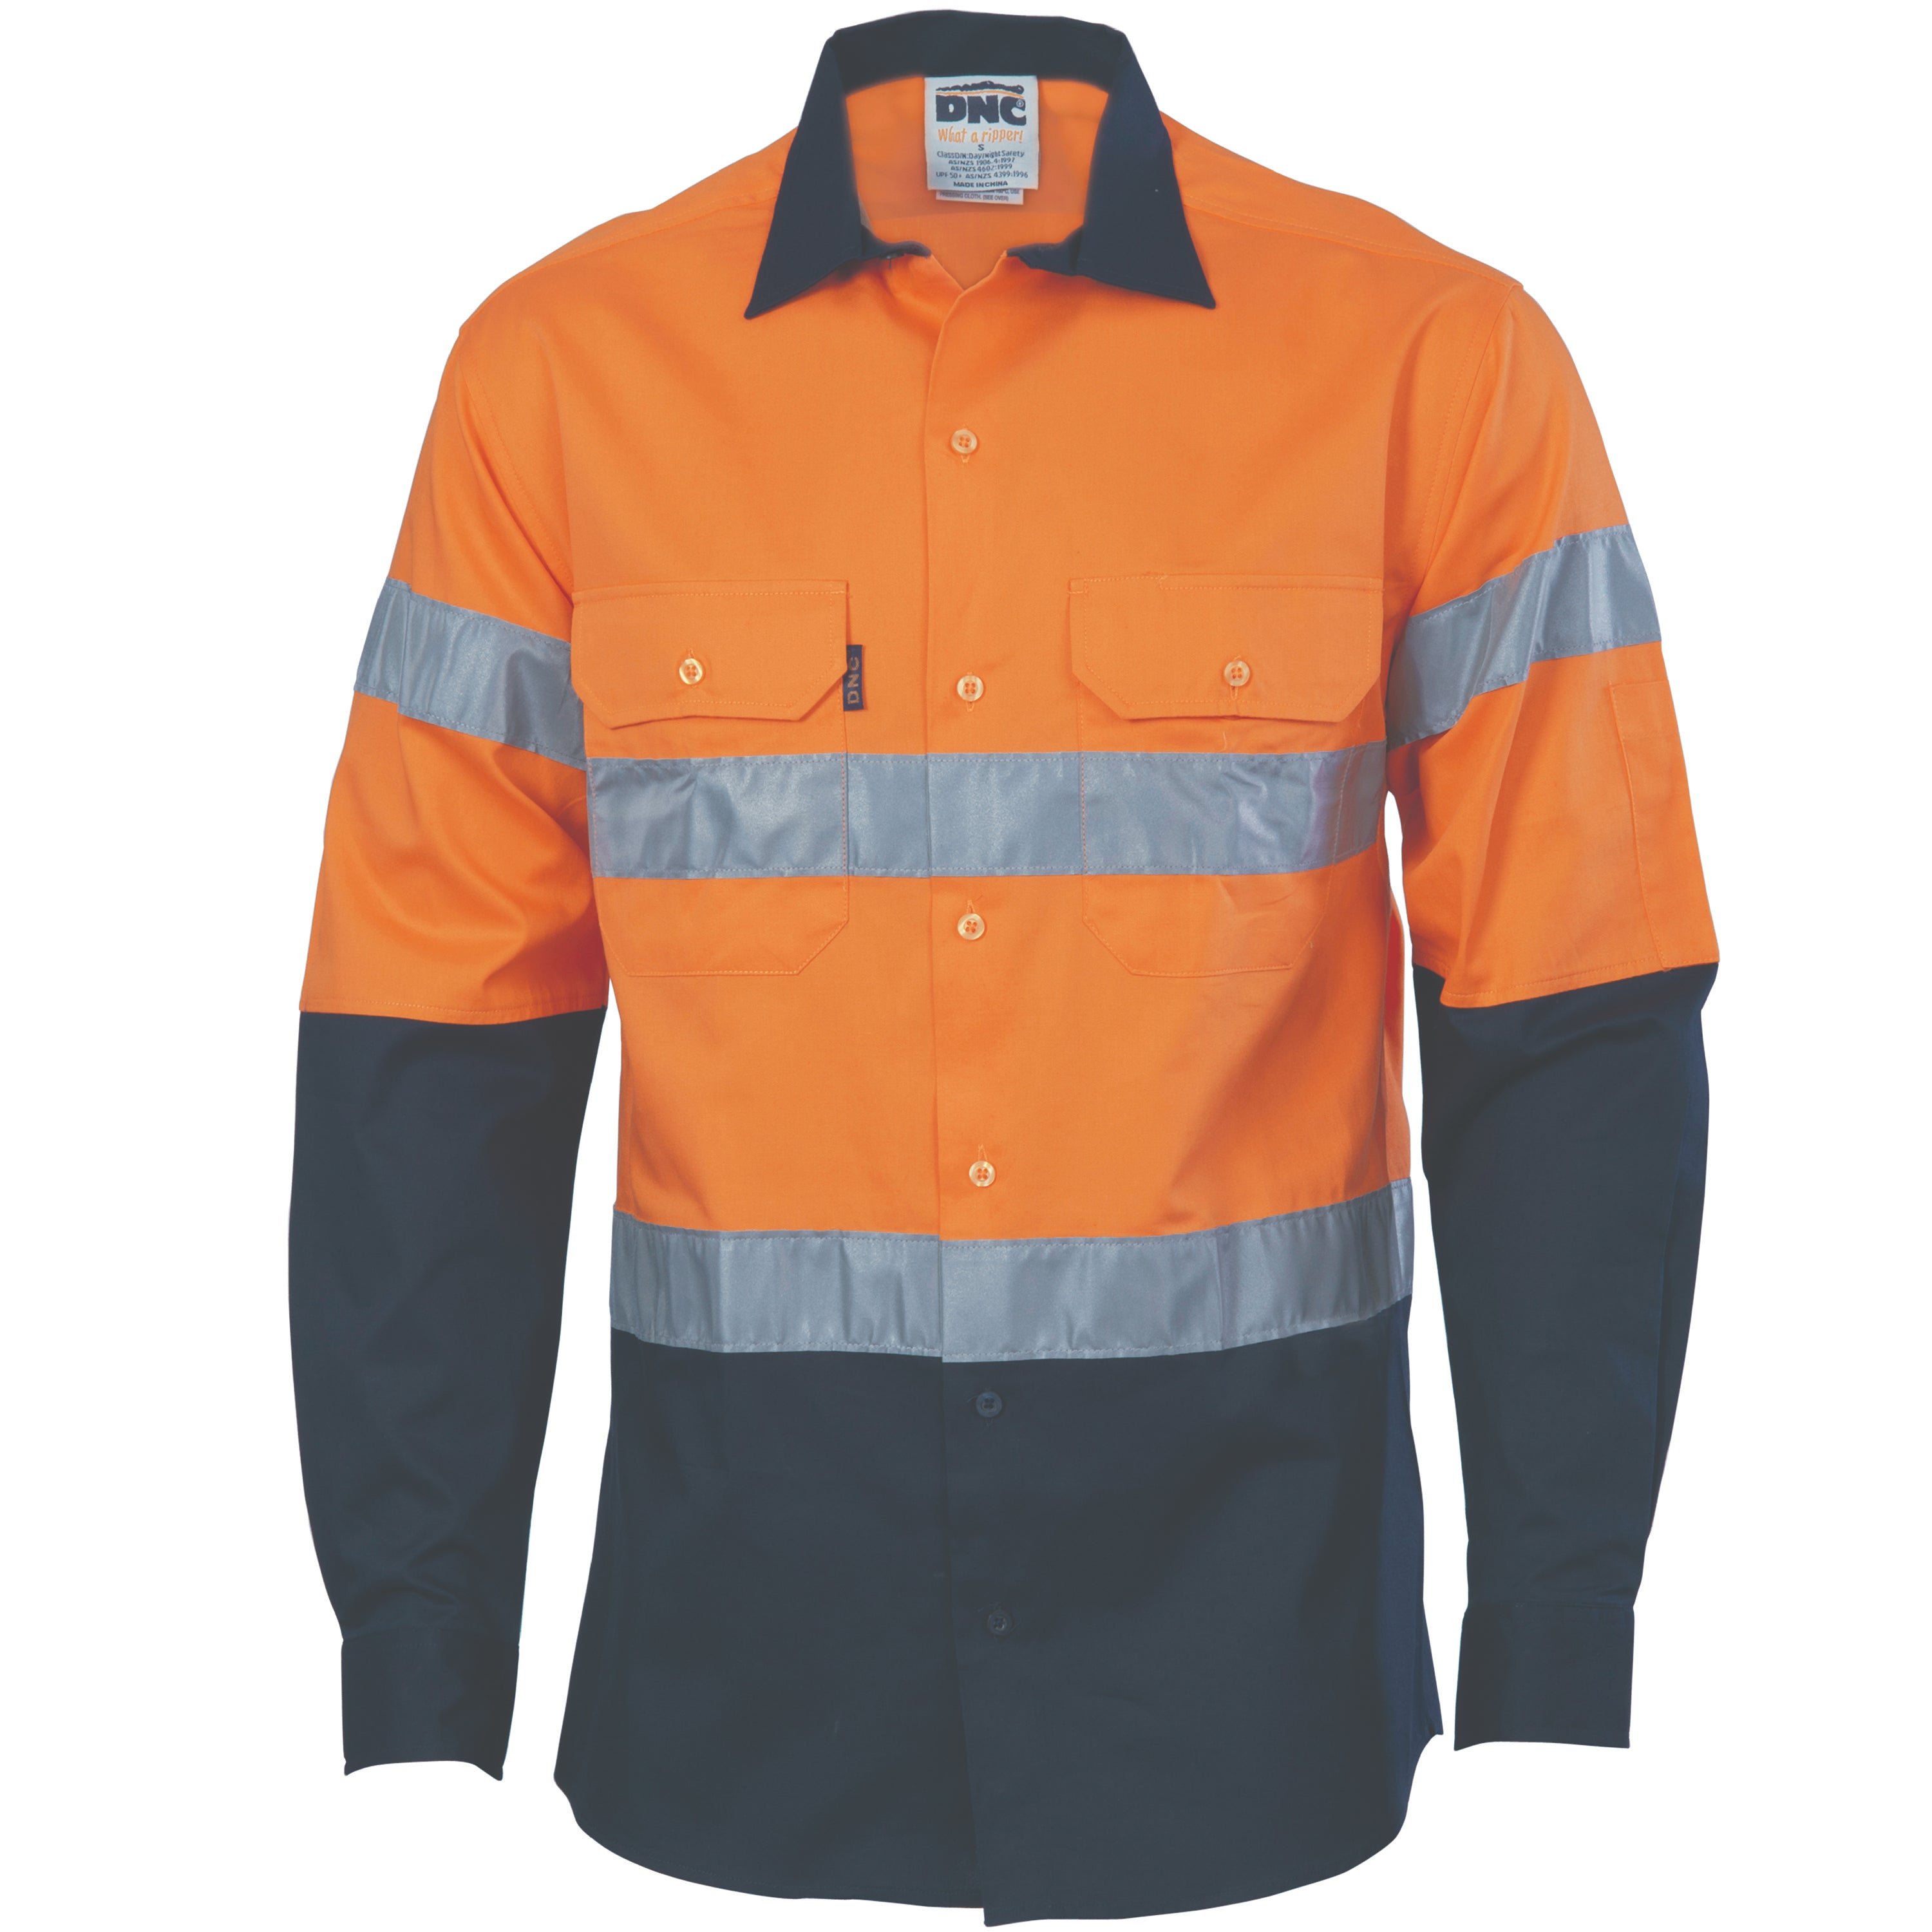 DNC - 3982 Hi-Vis Heavy Weight Cotton Long Sleeve Shirt with Tape